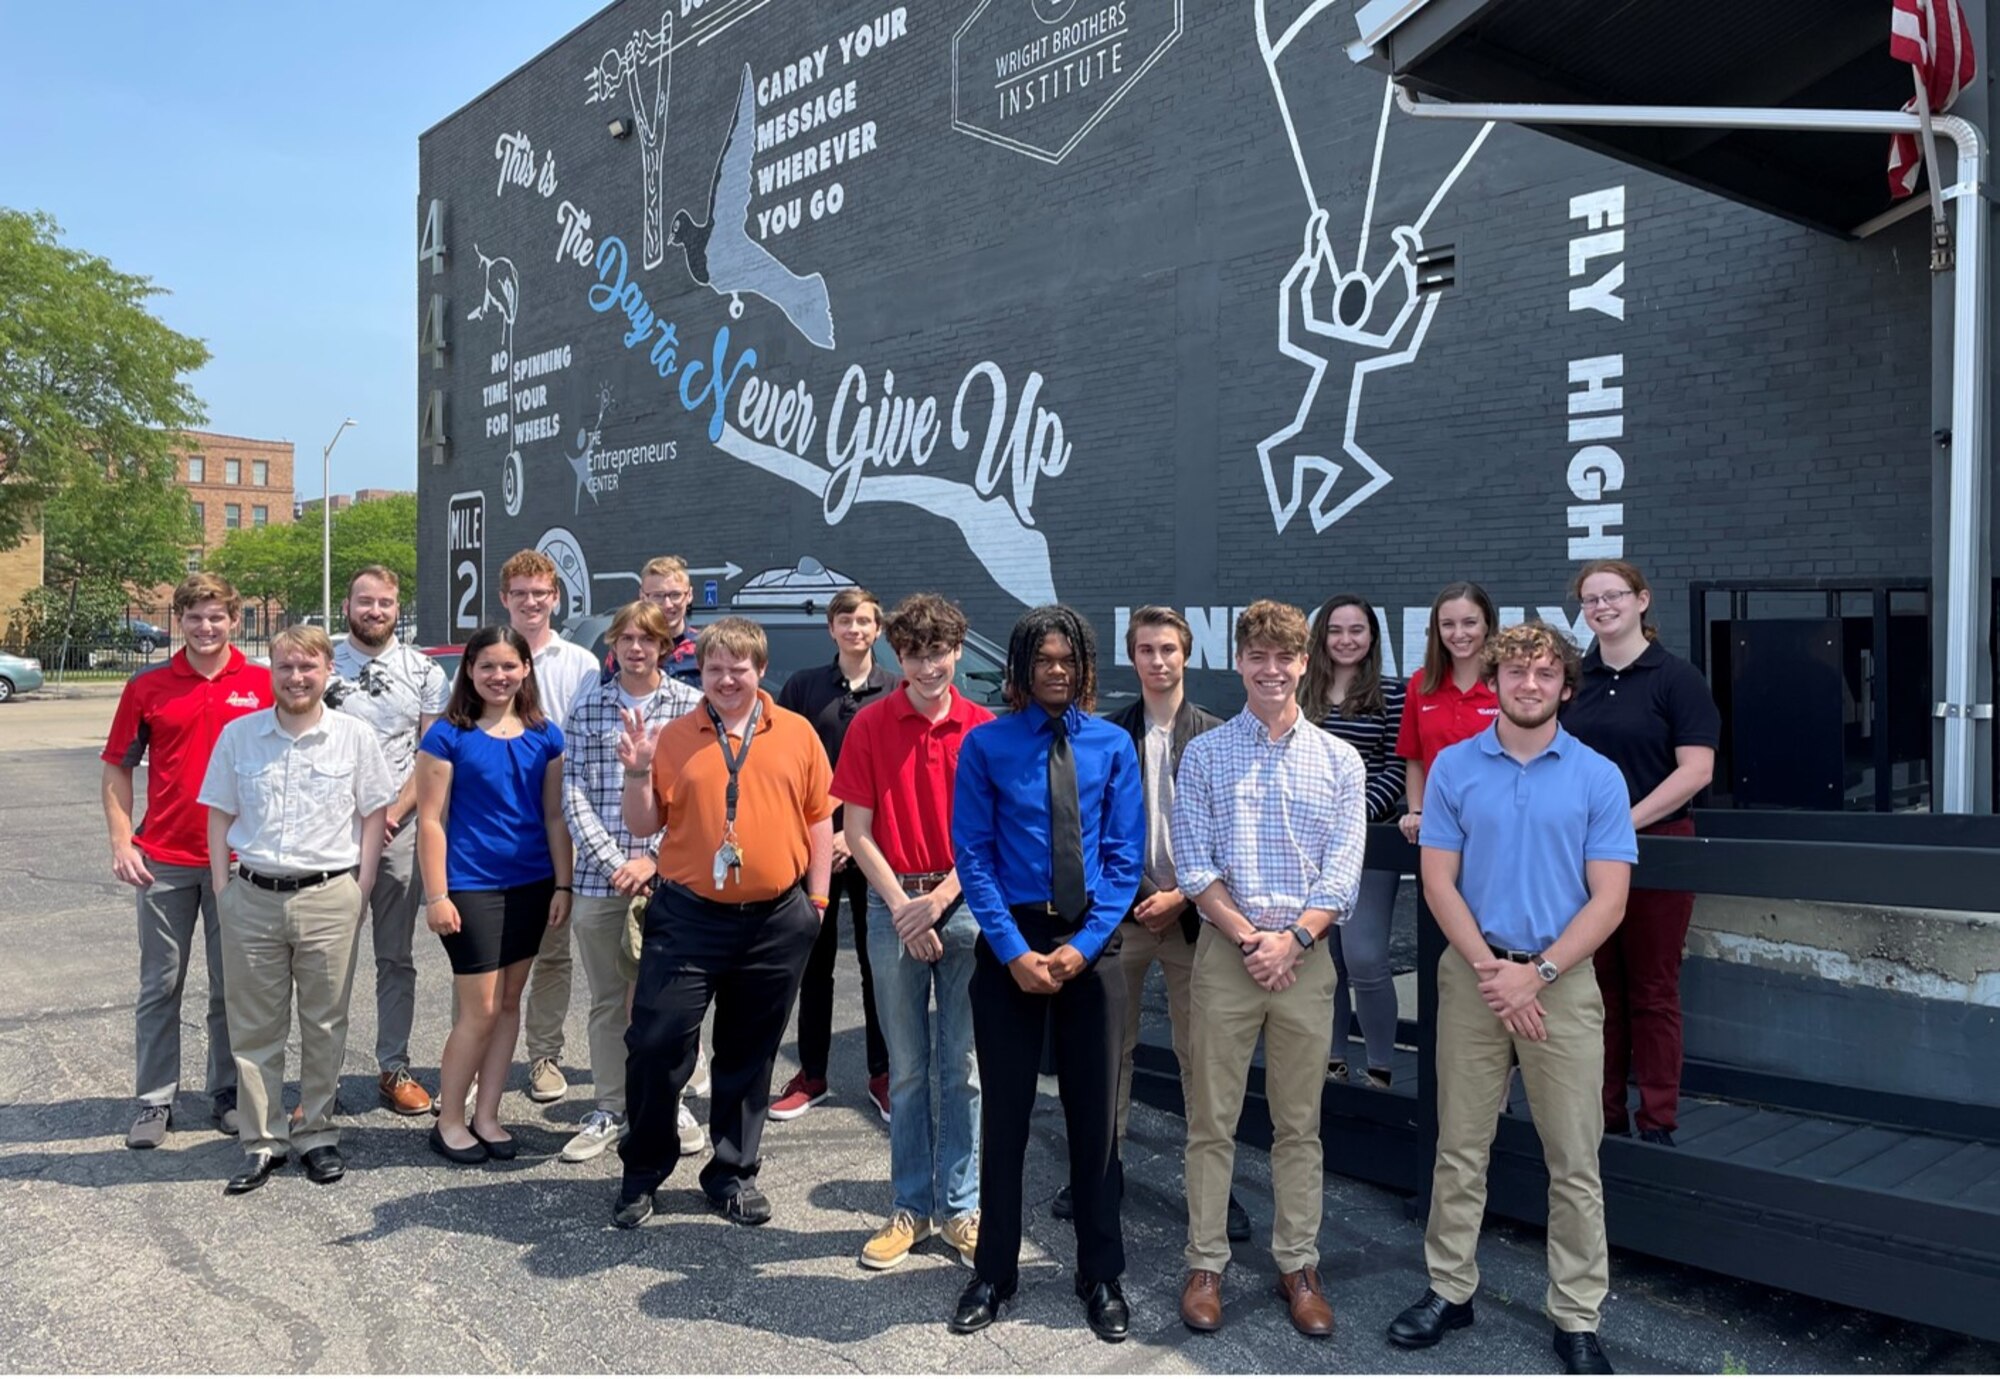 A cohort of interns smiles for a group photo in front of the Wright Brother Institute's downtown location, Aug. 10, 2021, in Dayton, Ohio. These students are participants in the "Summer of Innovation - Digital Drone" program. (Courtesy photo)